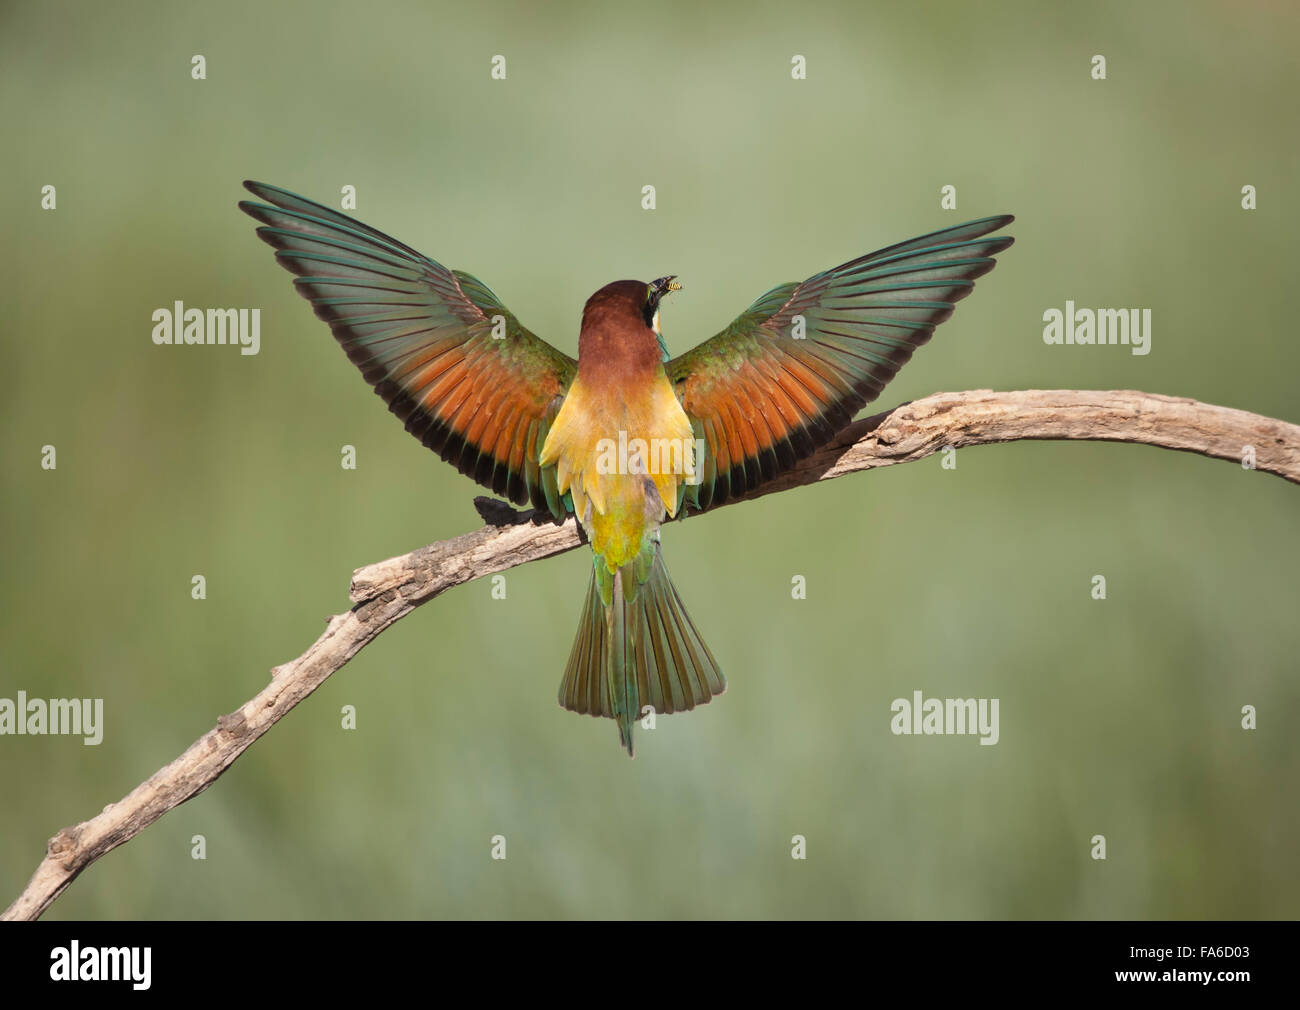 Bee eater bird on a branch with wings spread, Pitillas, Navarra, Spain Stock Photo